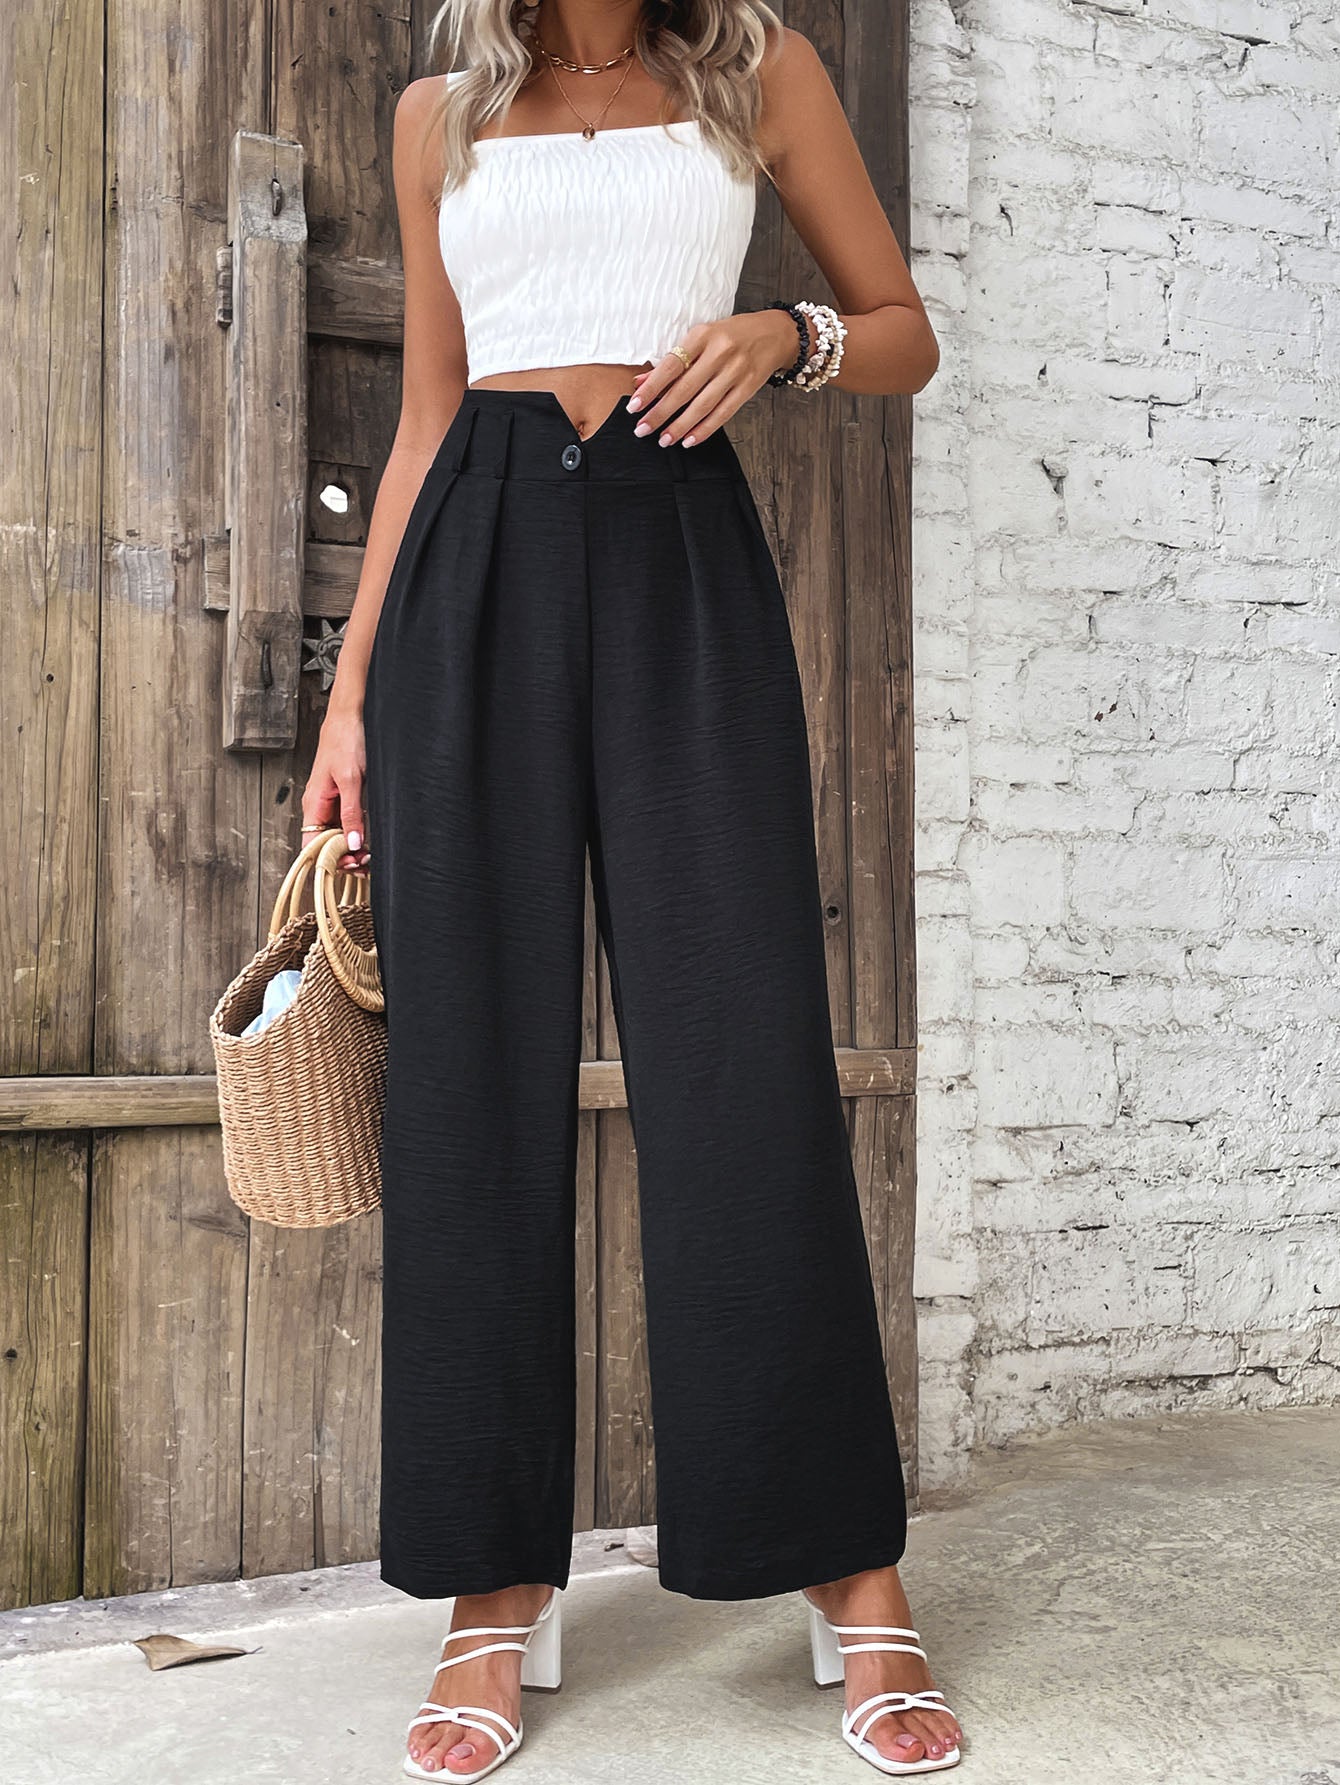 INSPRIRE ME Ruched High Waist Straight Leg Pants